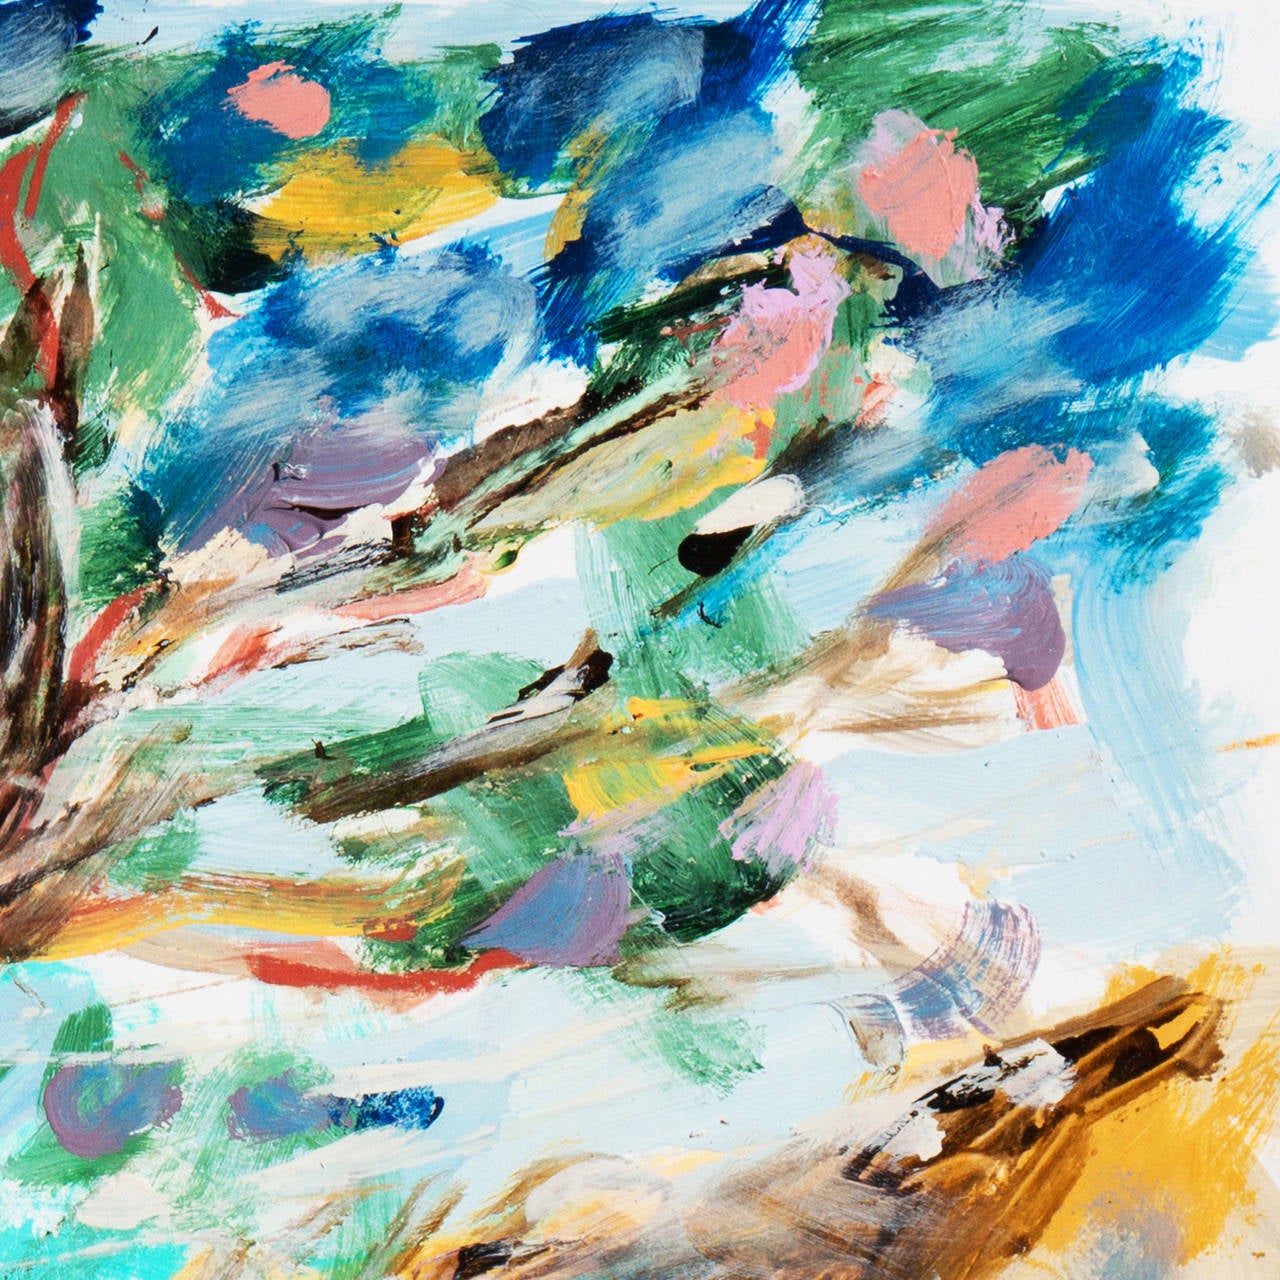 Signed lower right, 'Canete' and painted in 2010

A bold, Expressionist landscape showing a view of eucalyptus trees on a hill above Cap Ferrat on the Côte d'Azur in Southern France.  A lyrical work by this noted Carmel artist who studied with